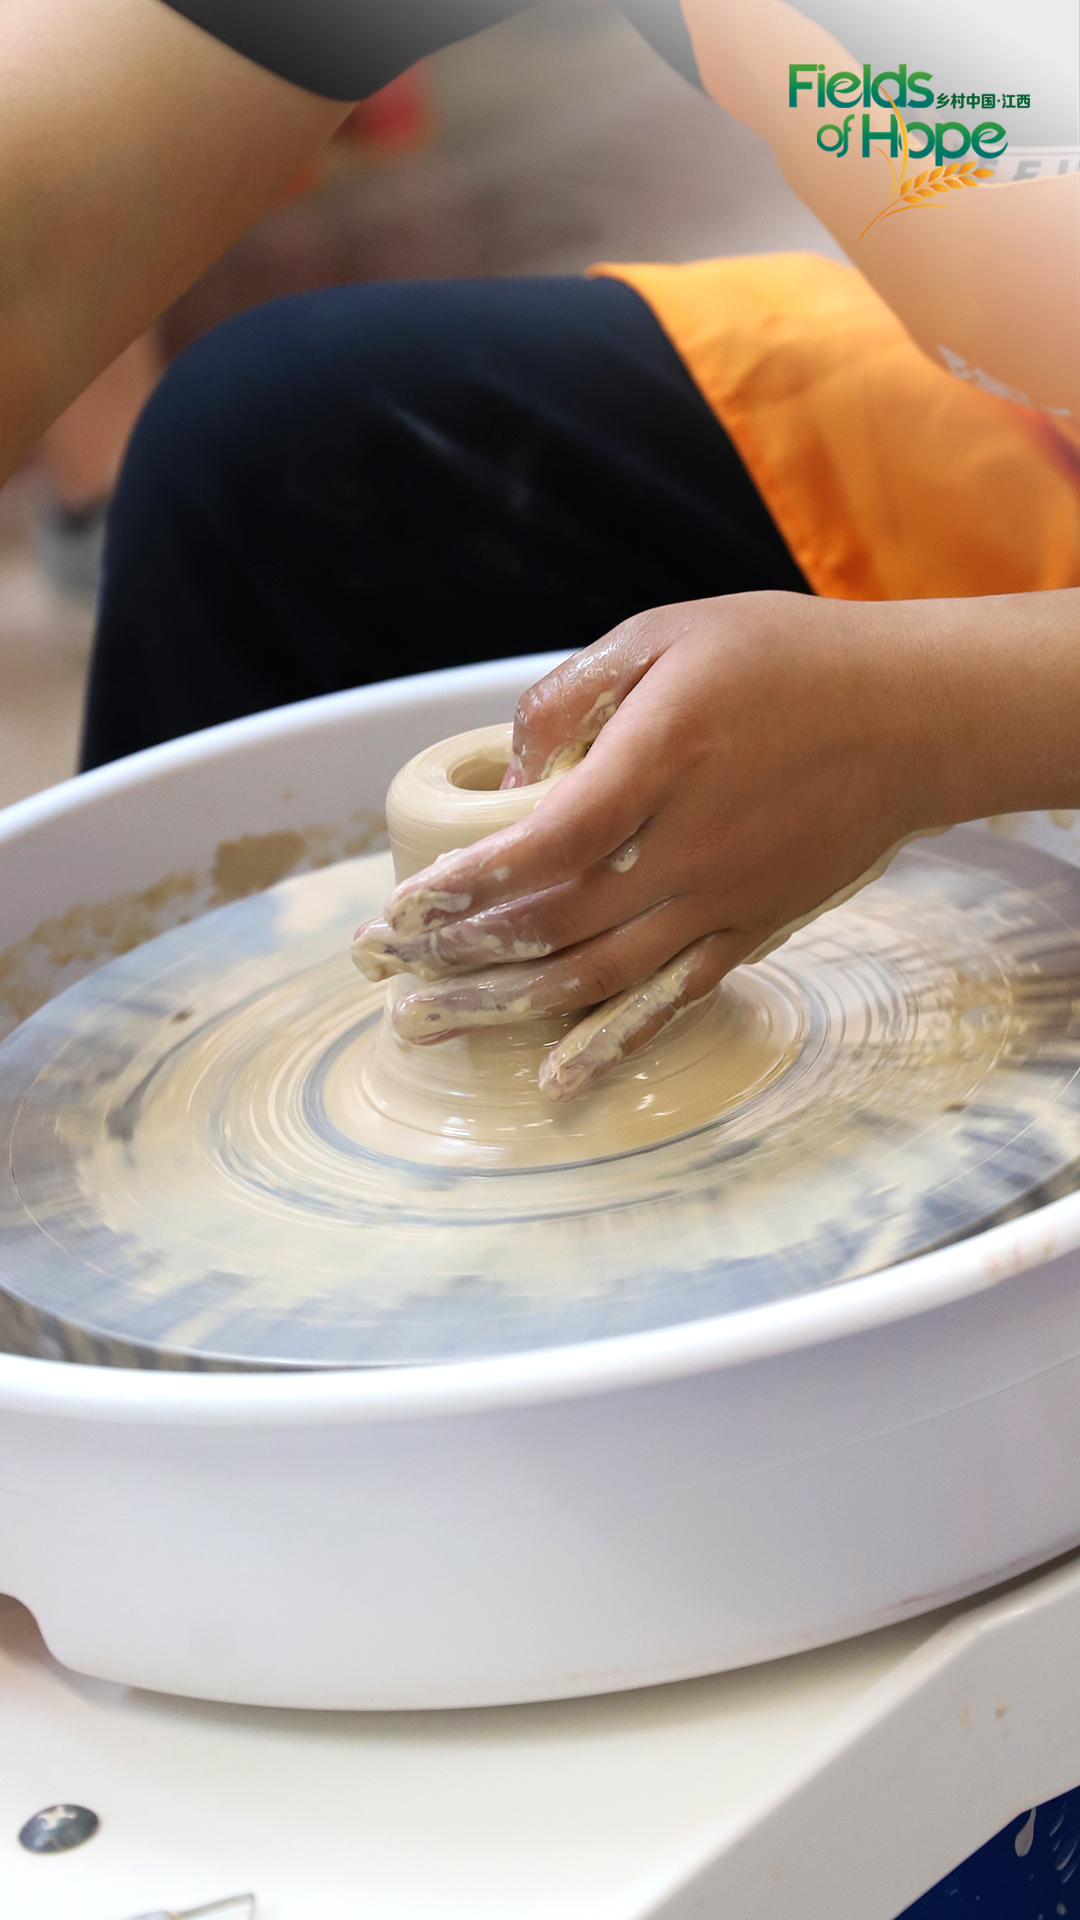 The DIY experience is proving exceptionally popular as many visitors are eager to dip their fingers in the clay after visiting the kilns and museums in Jingdezhen, which is also known as China’s porcelain capital. /CGTN